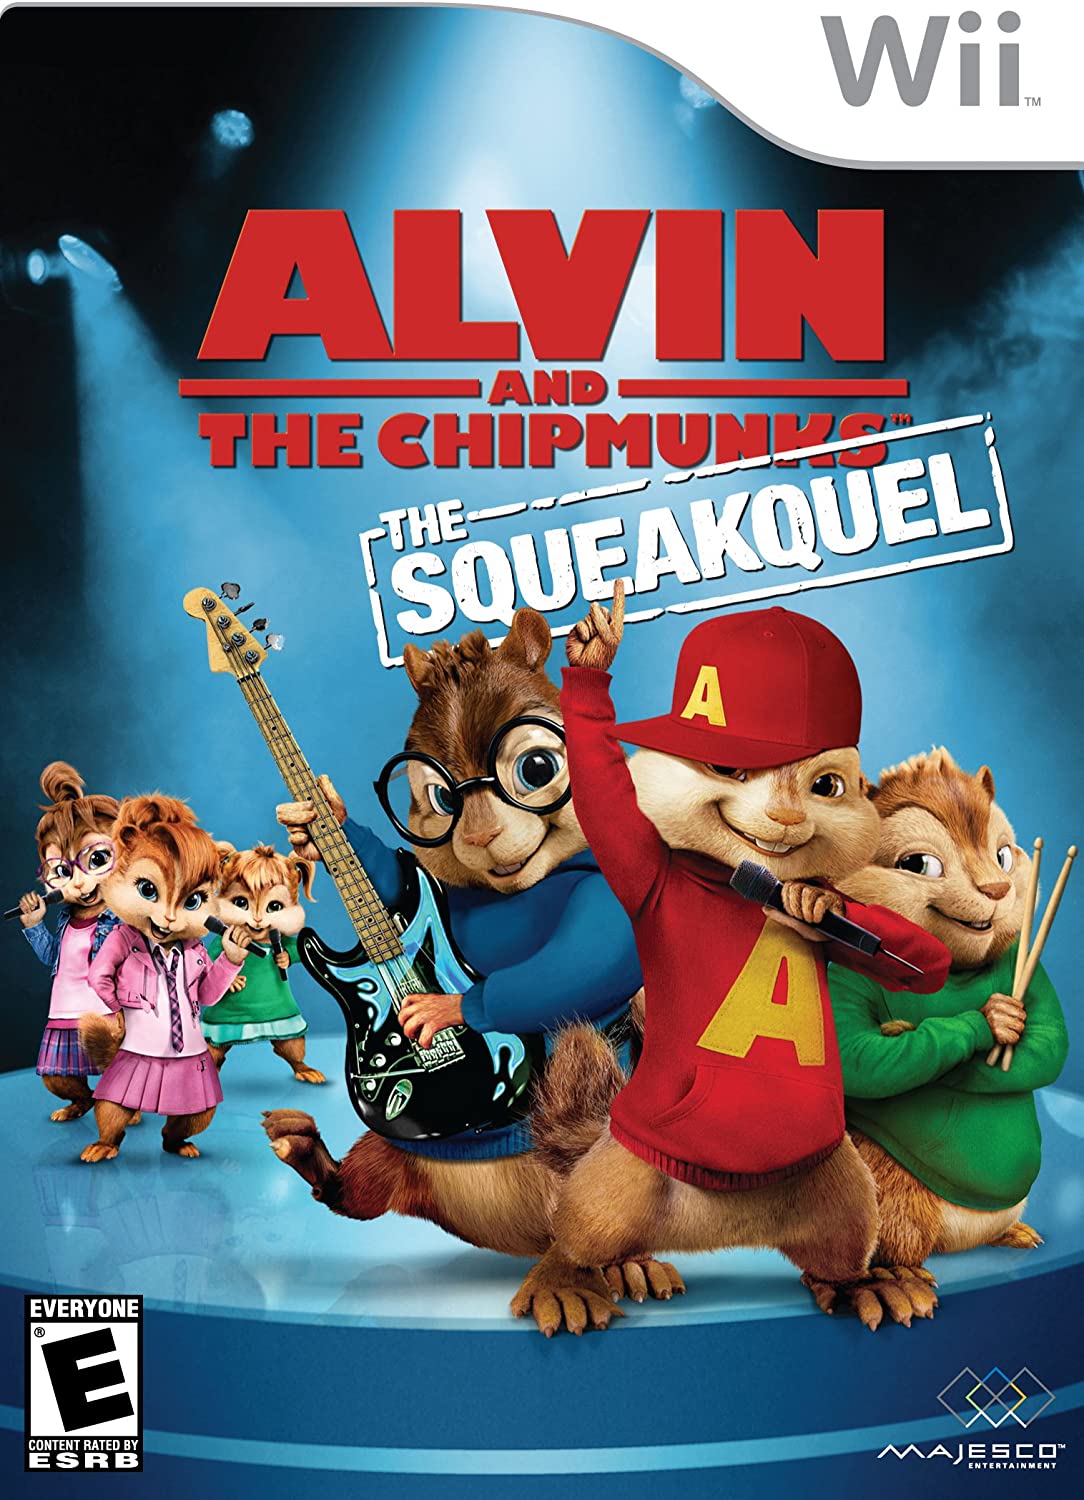 Alvin and the Chipmunks - The Squeakquel - Wii